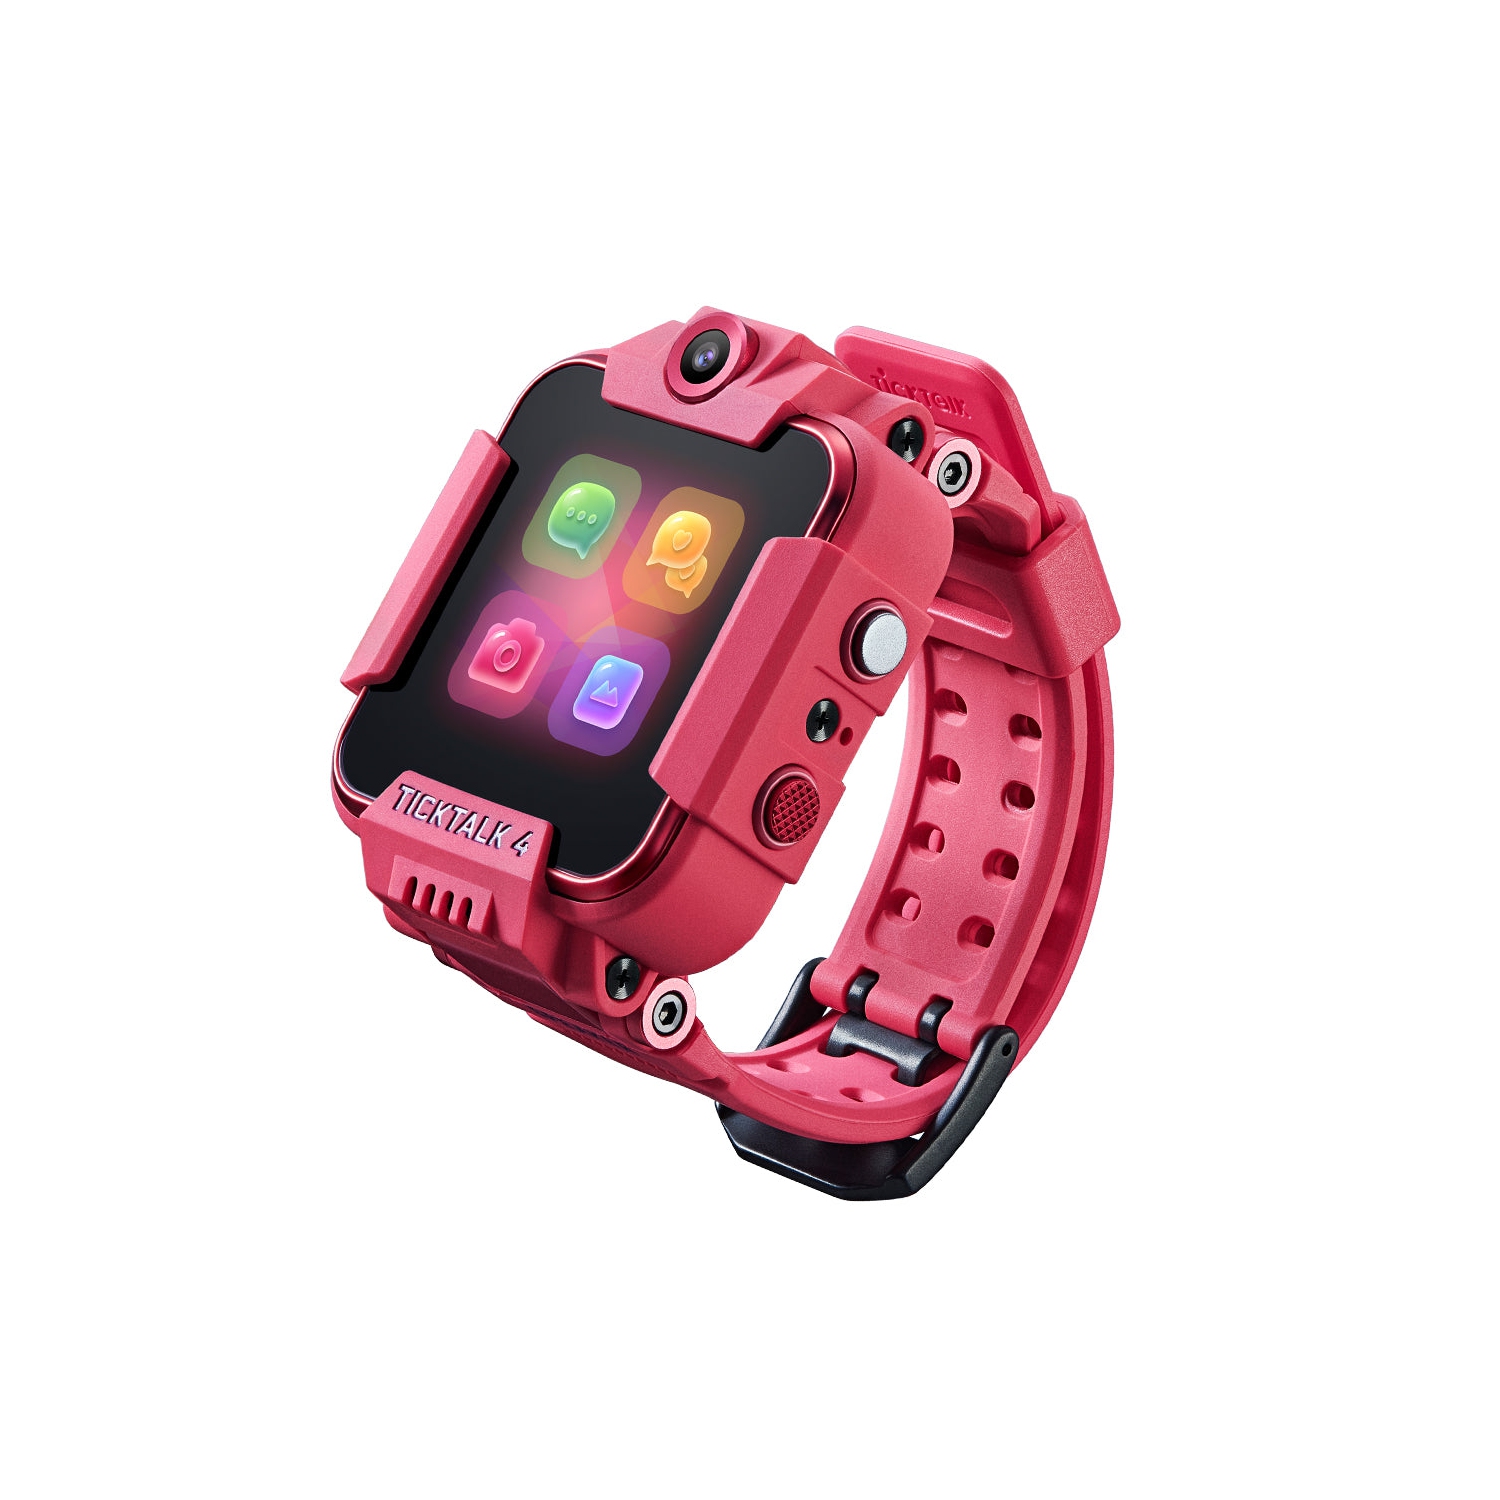 TickTalk 4 Unlocked 4G LTE Kids Smart Watch Phone with GPS Tracker, Combines Video, Voice and Wi-Fi Calling, Messaging & 2x Cameras - Laser Pink (No SIM Included)